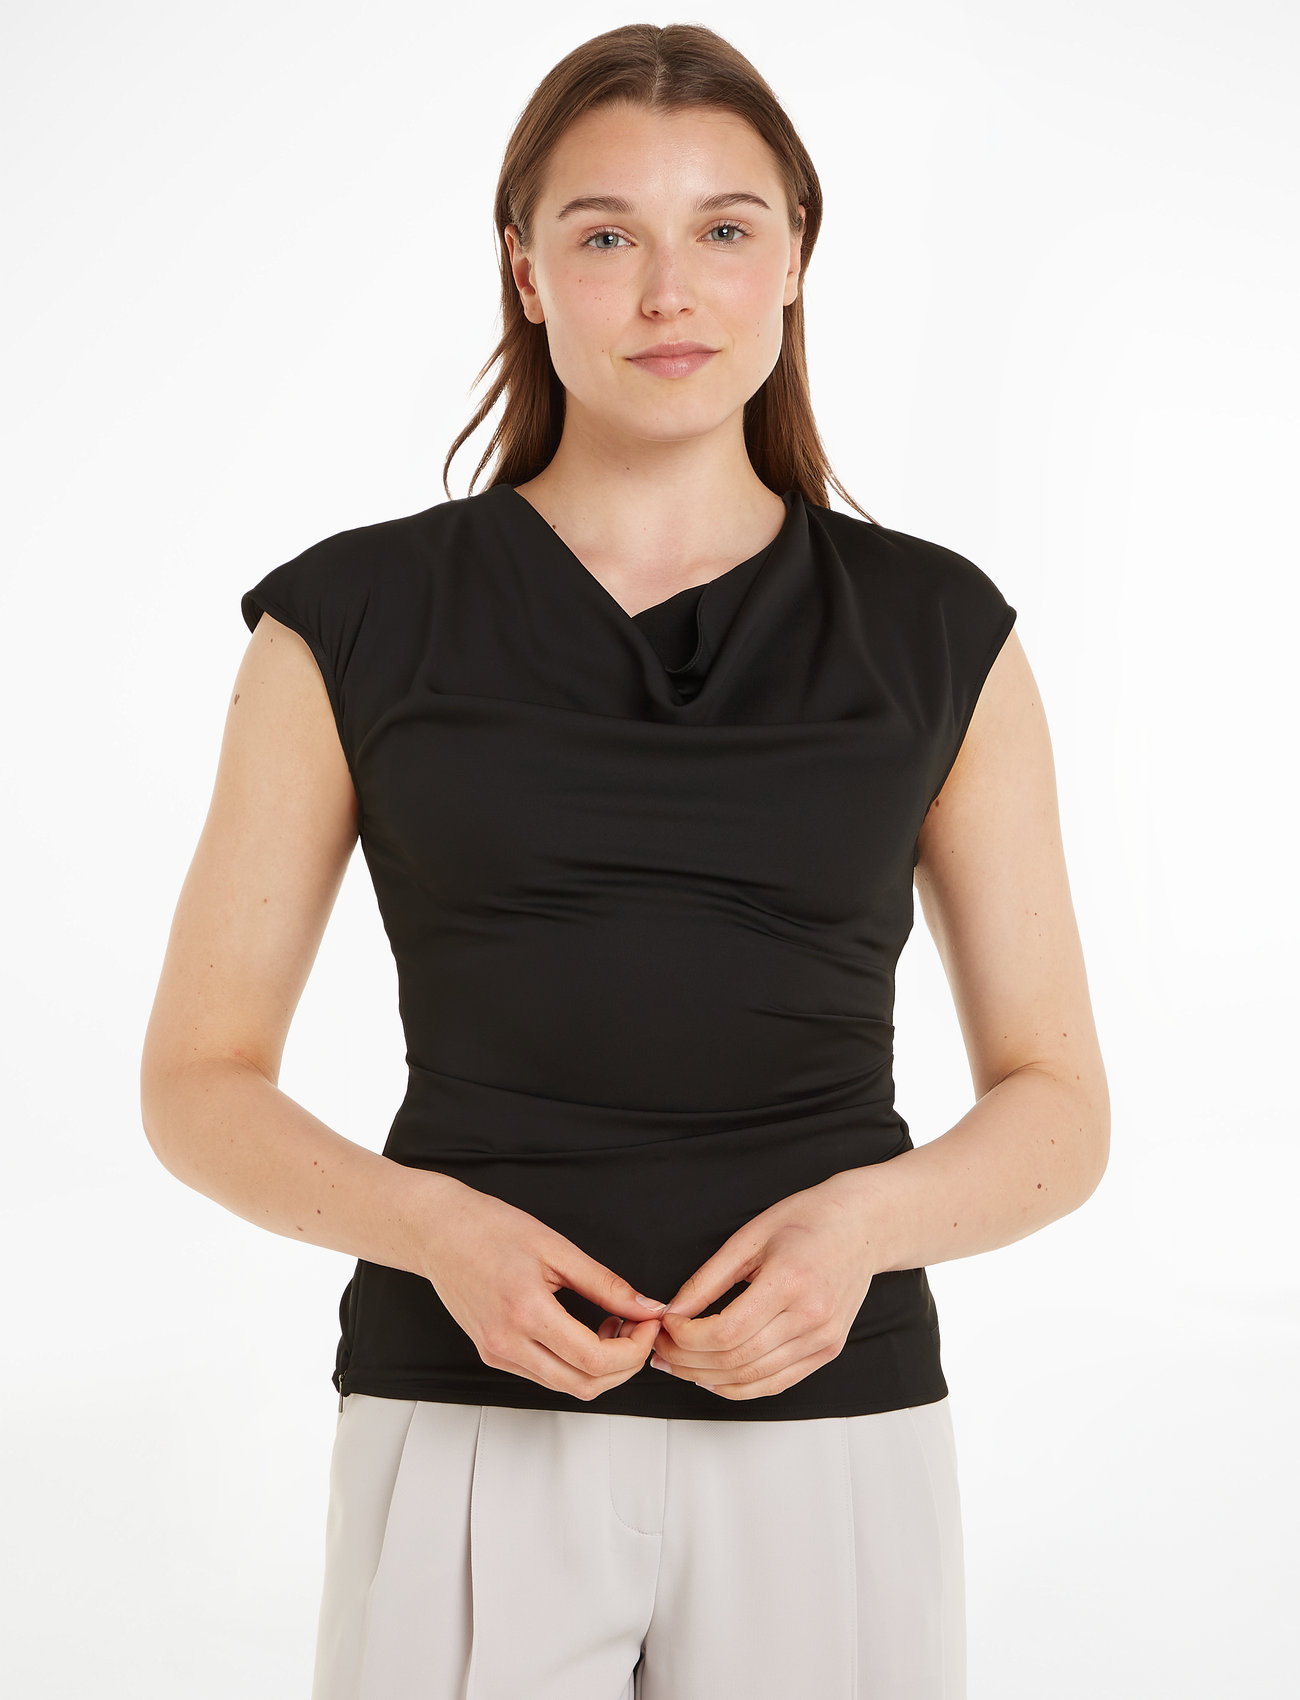 Calvin Klein - RECYCLED CDC DRAPED TOP - short-sleeved blouses - ck black - 0